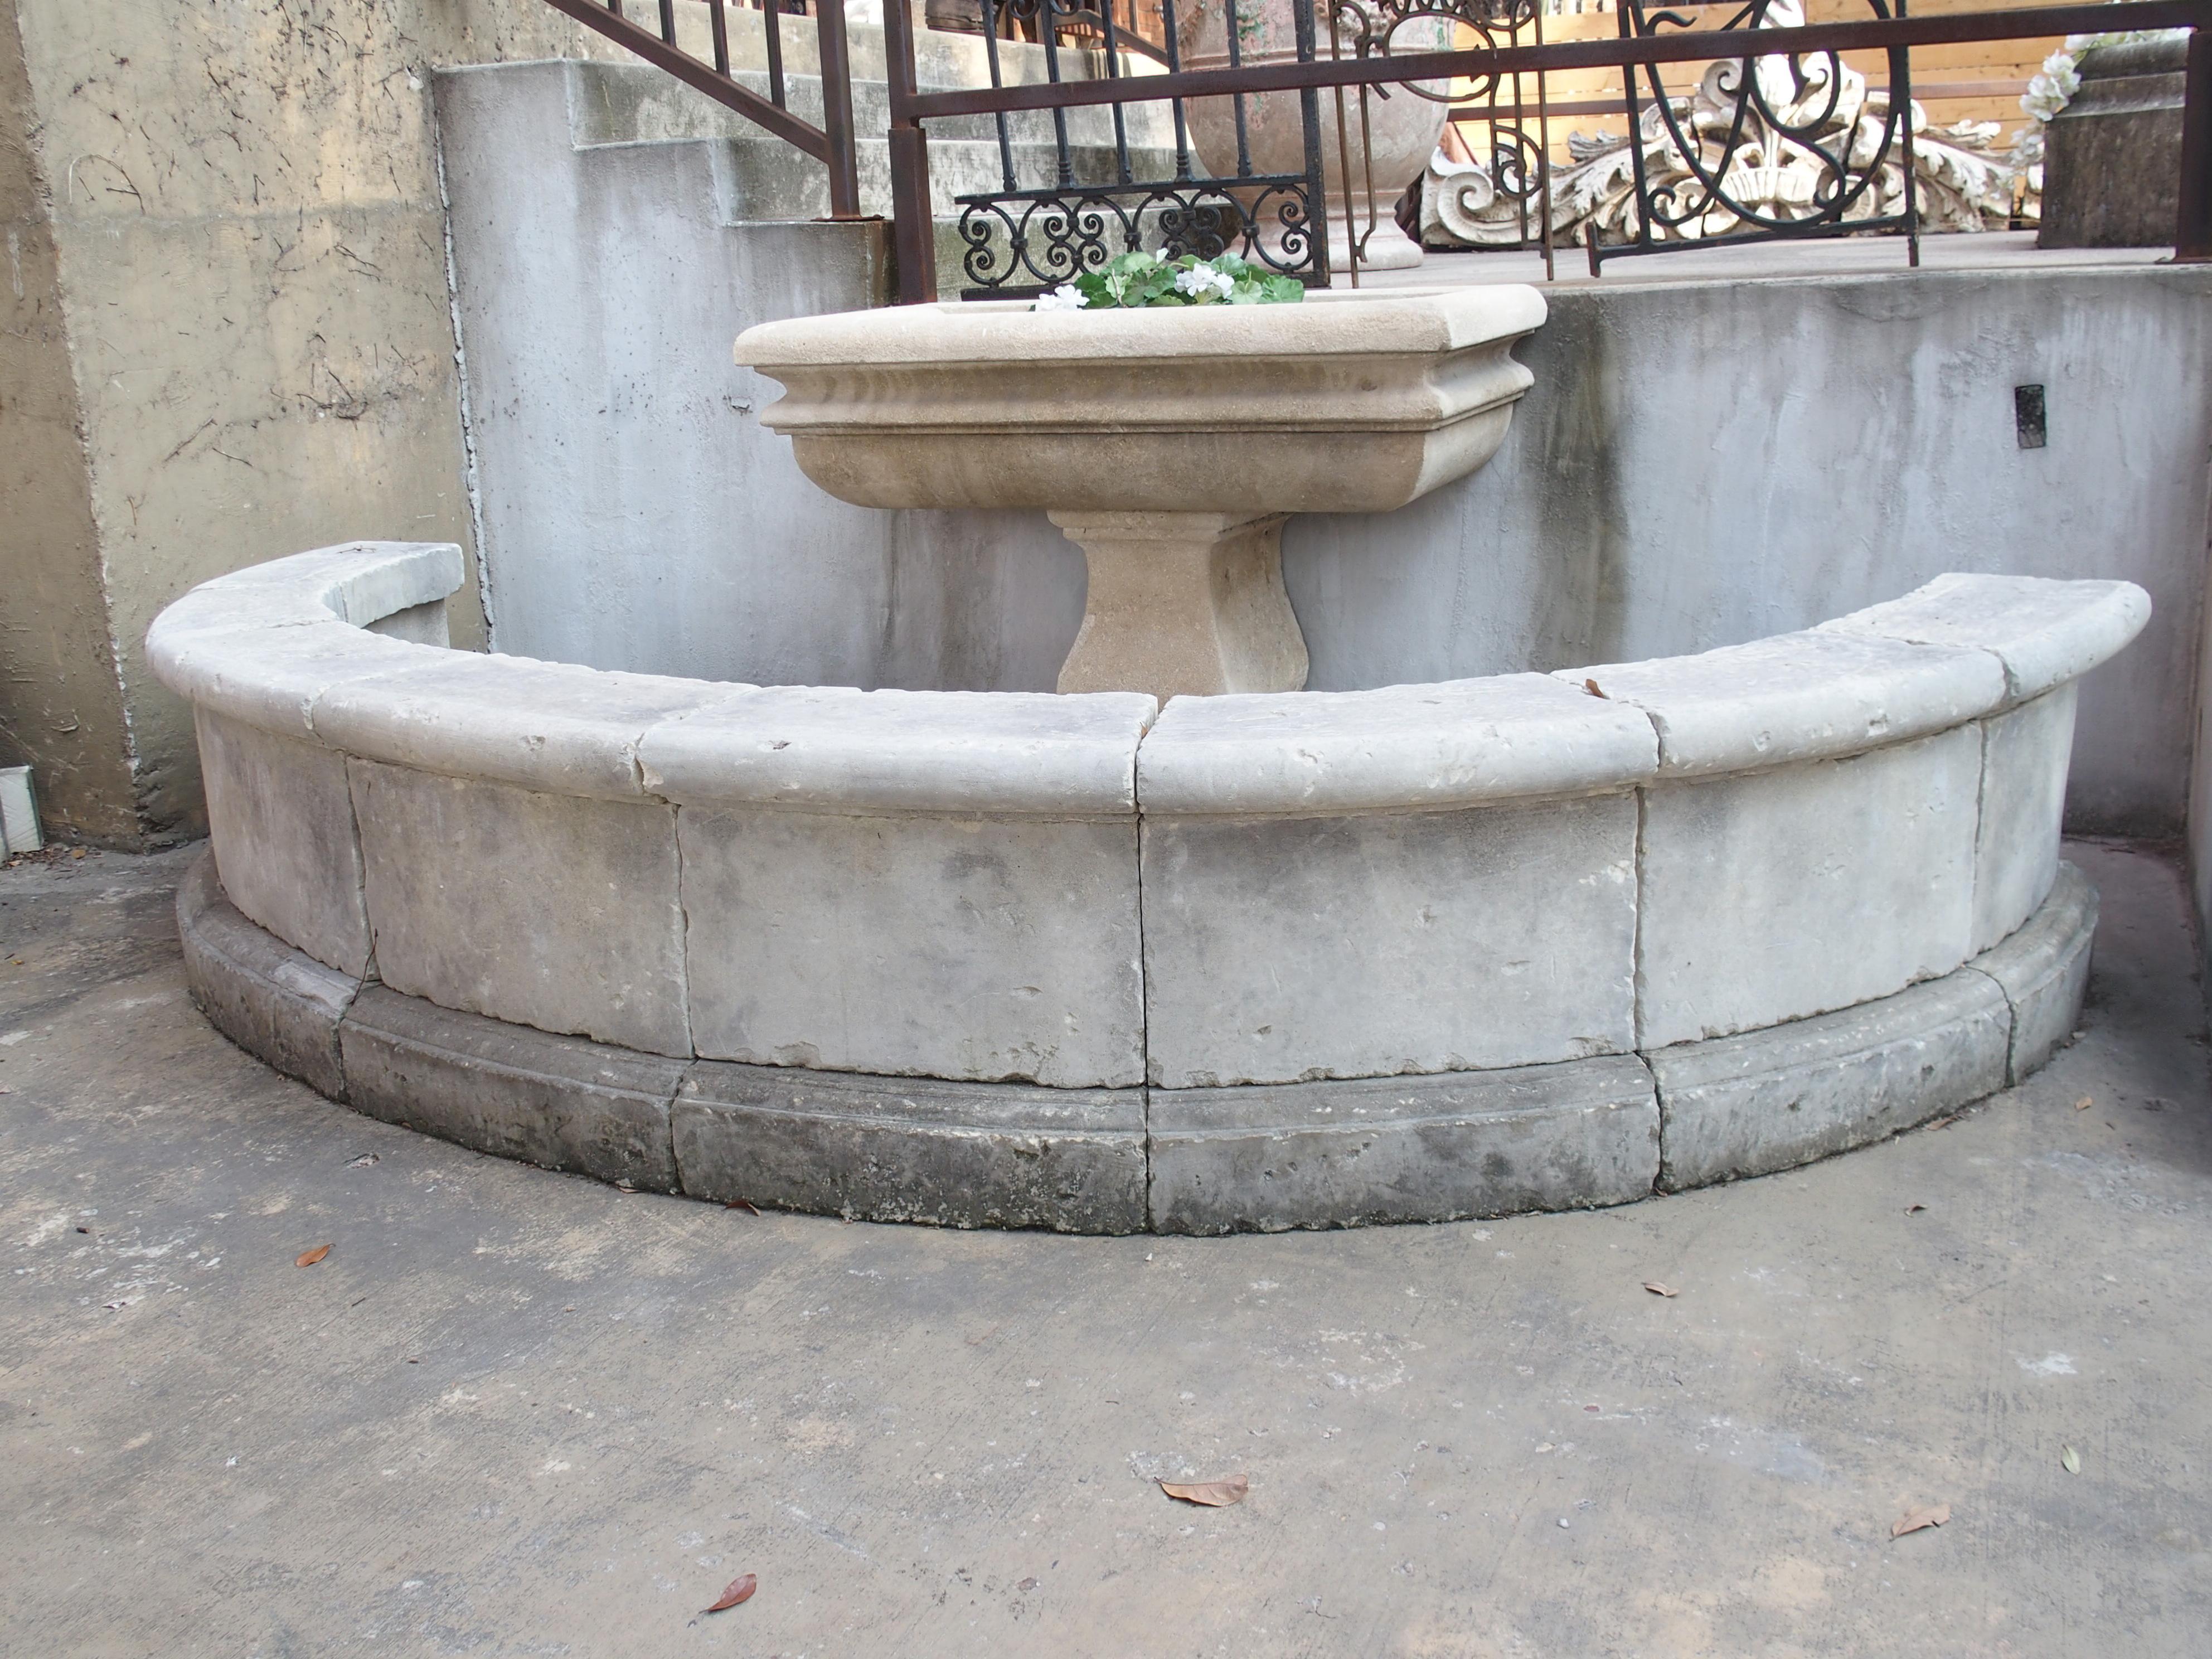 Hand-carved and distressed in Southern Italy, these stones were originally part of a large wall fountain. The 24 pieces of limestone would have formed a large semi-circular basin wall.

The curved wall consists of three tiers of stones. Large